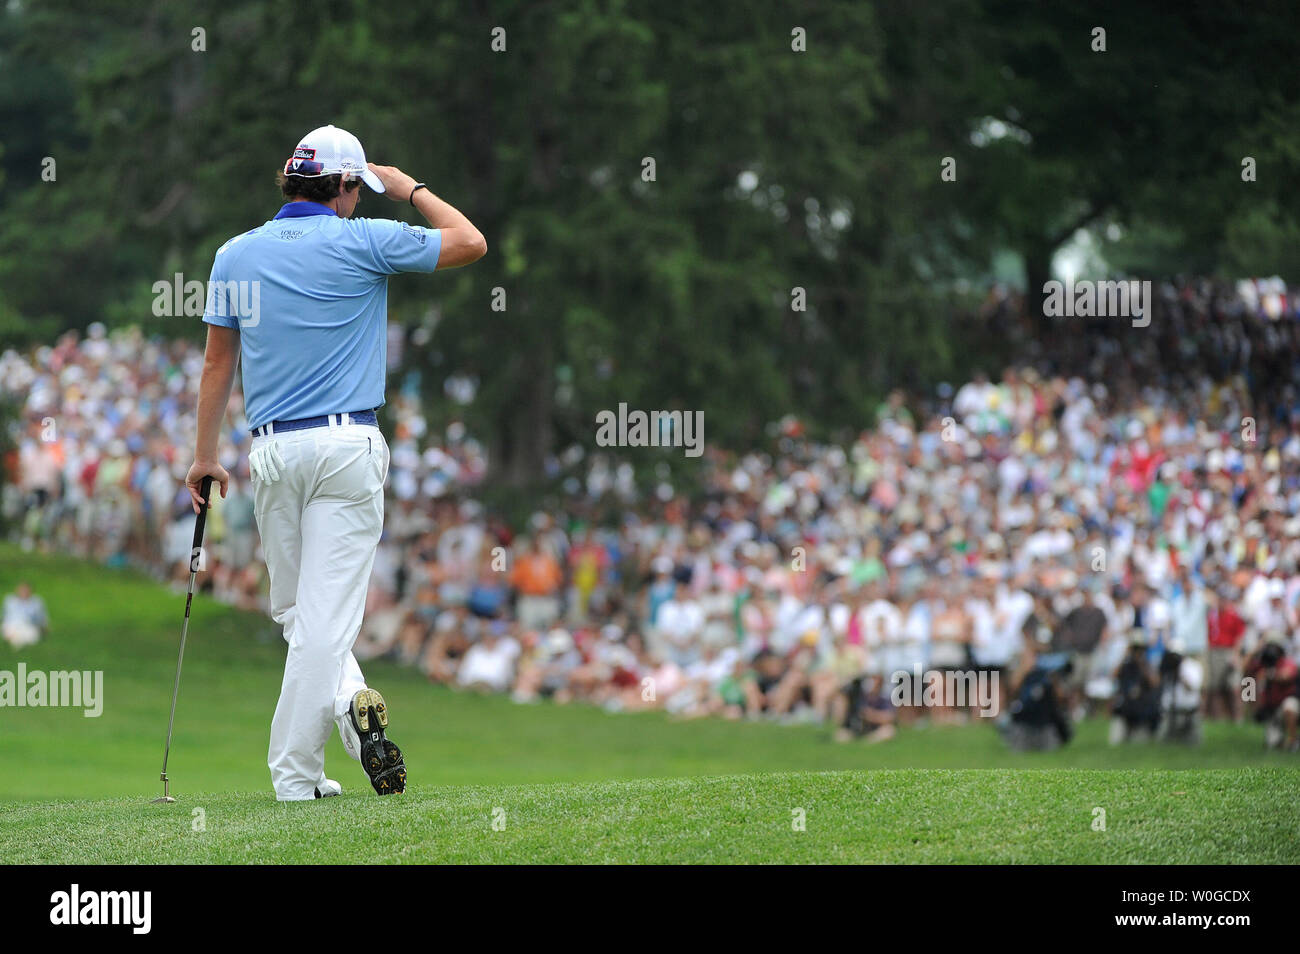 Northern Ireland's Rory McIlroy waits on the 6th green during the final  round of the 2011 U.S. Open golf championship at Congressional Country Club  in Bethesda, Maryland on June 19, 2011. McIlroy